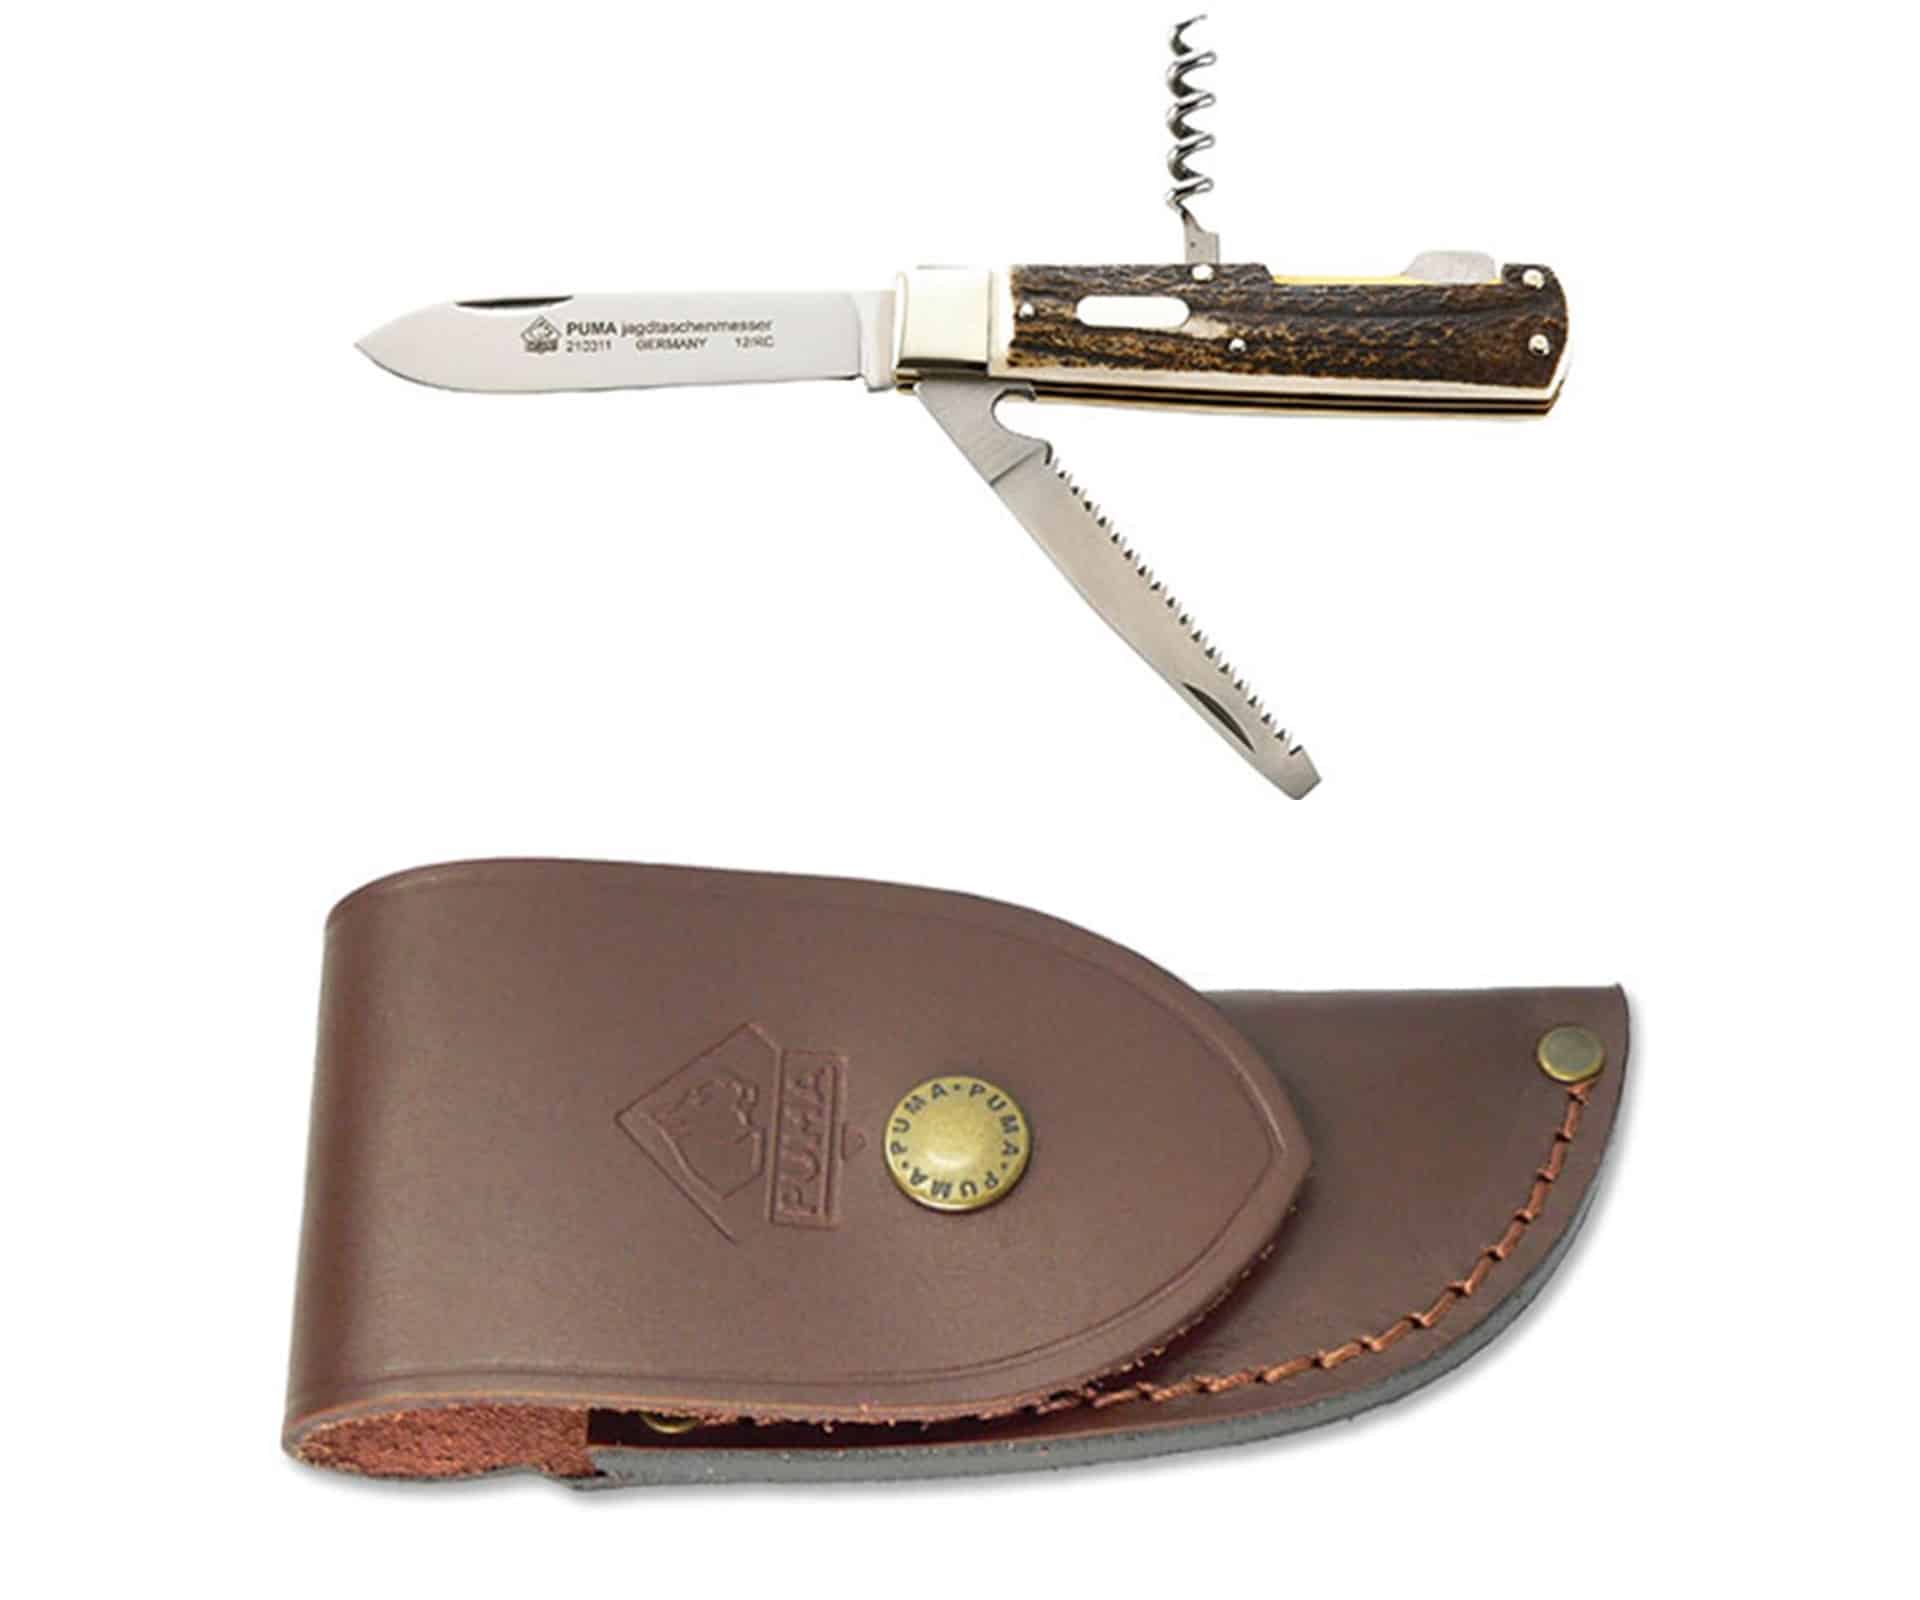 Puma hunting pocket knife 3-part with leather case